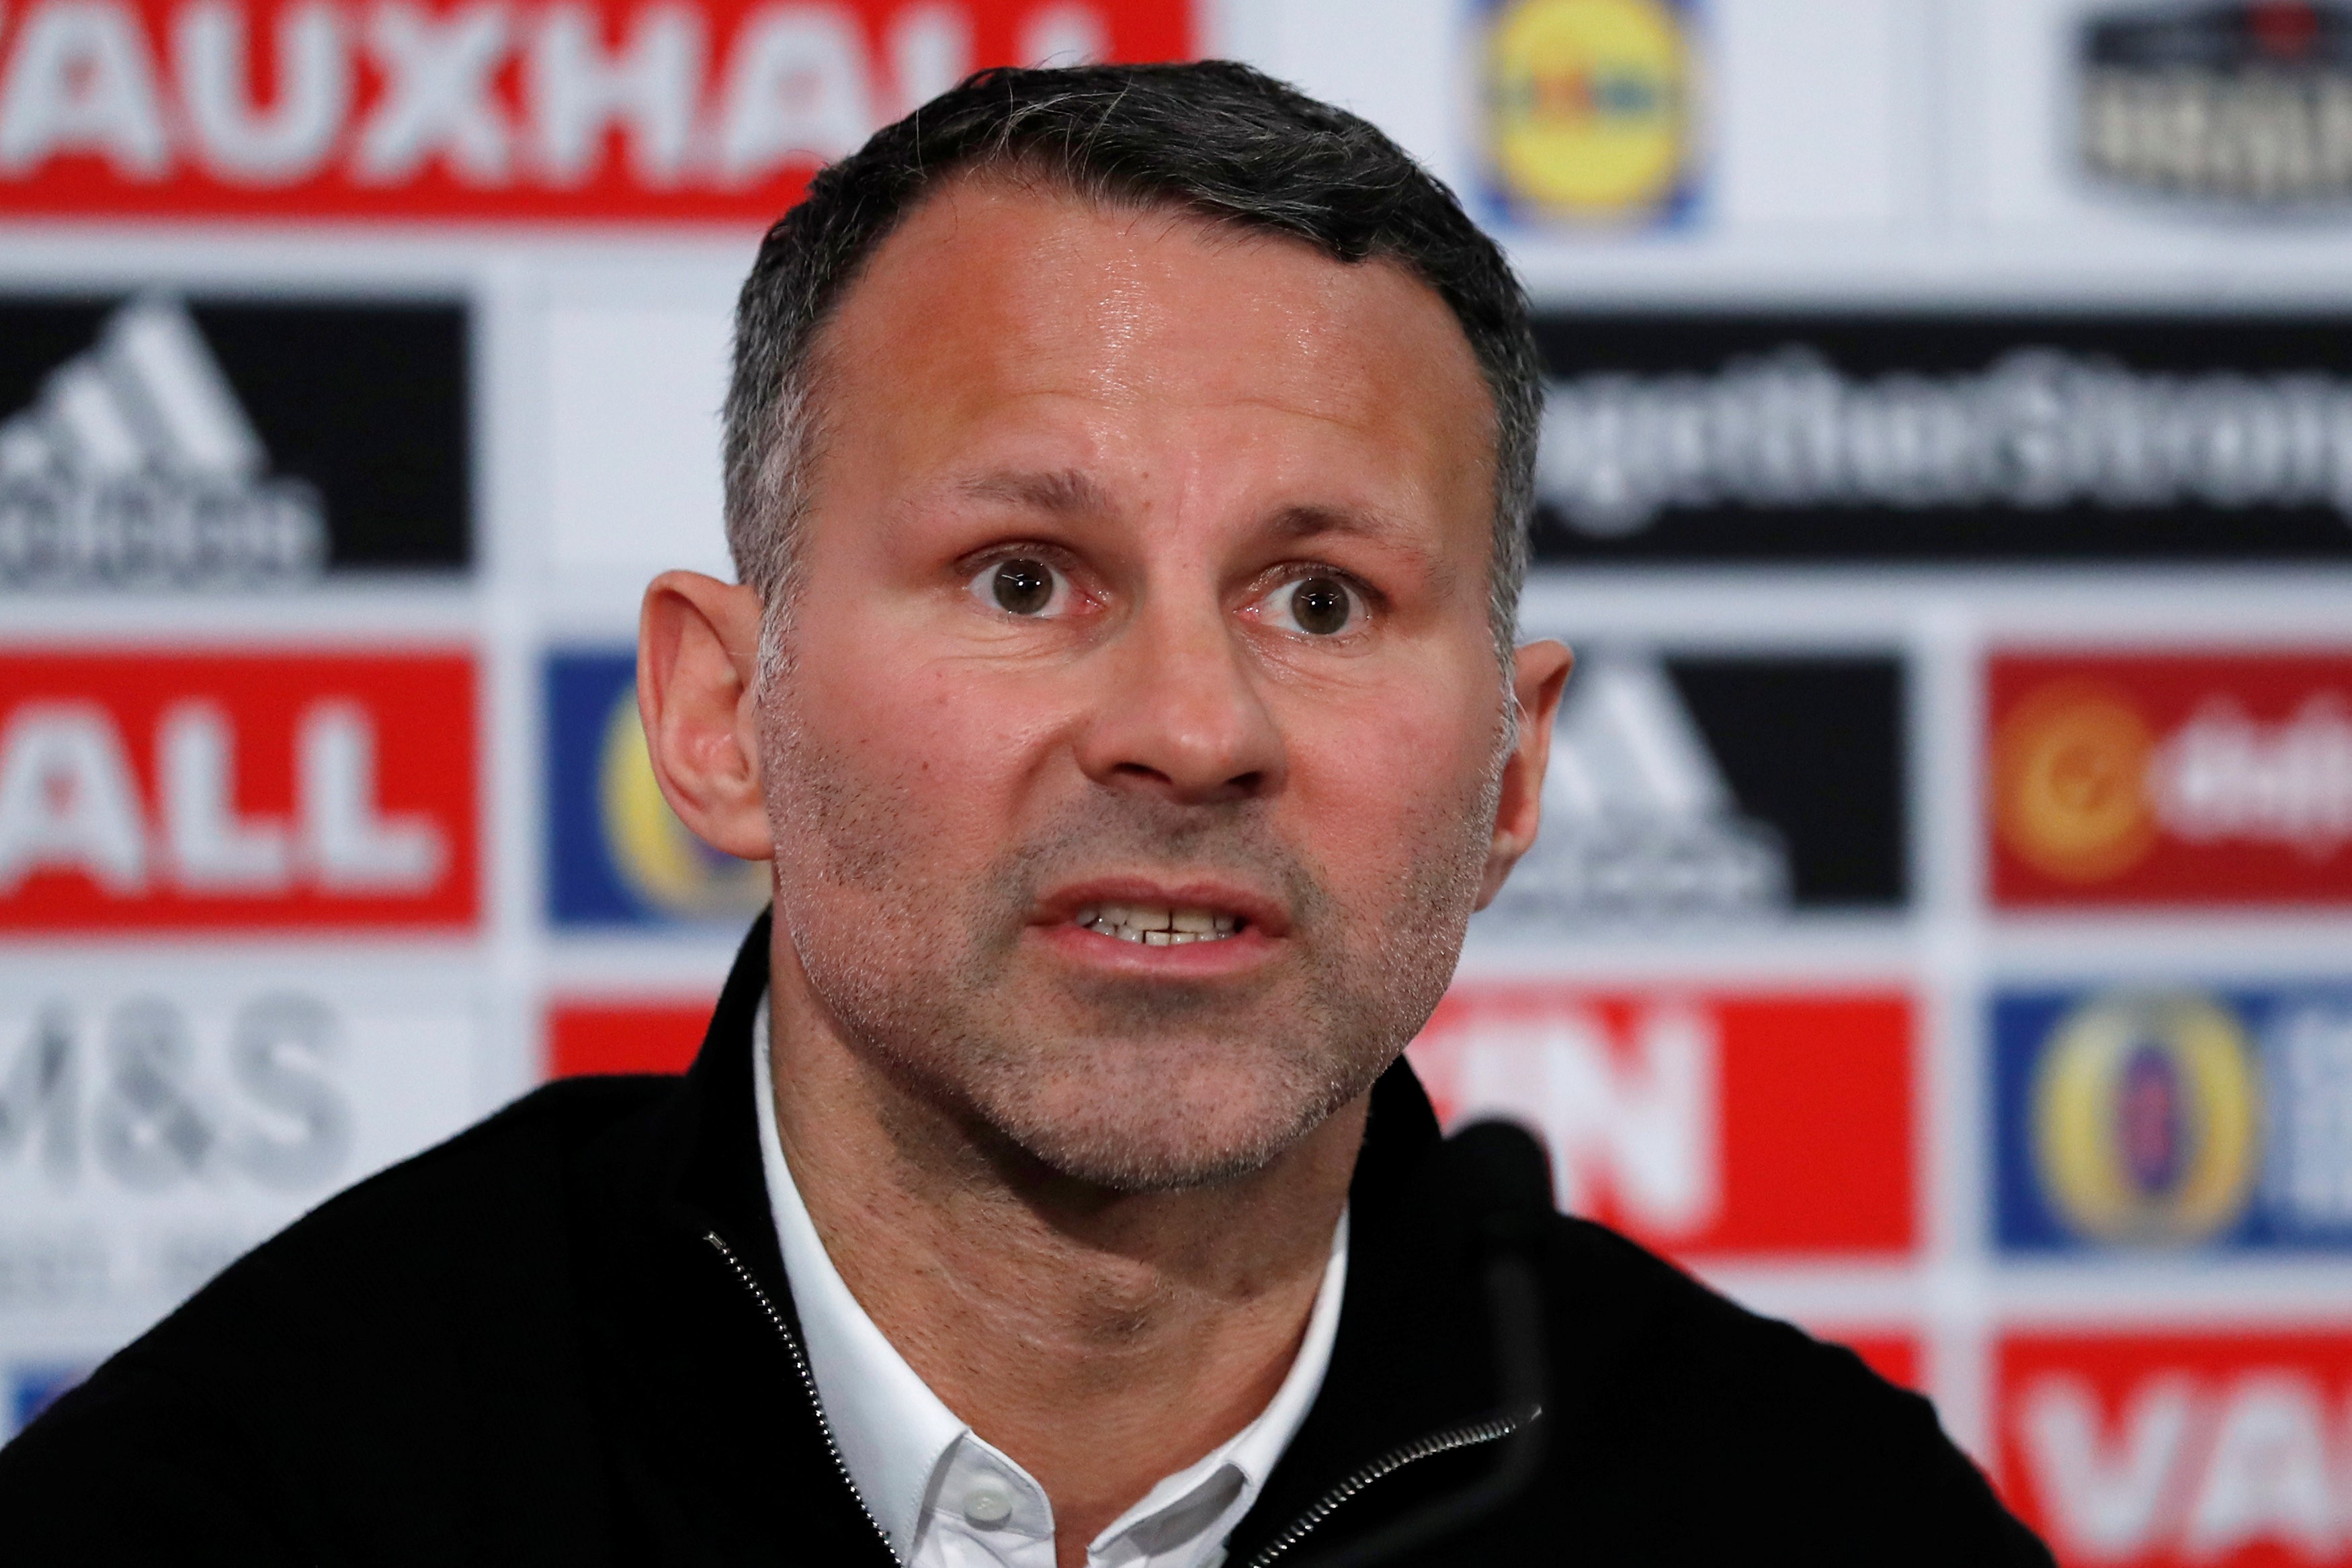 Ryan Giggs will take charge of Wales for the first time when they visit China at the end of March. Photo: Reuters